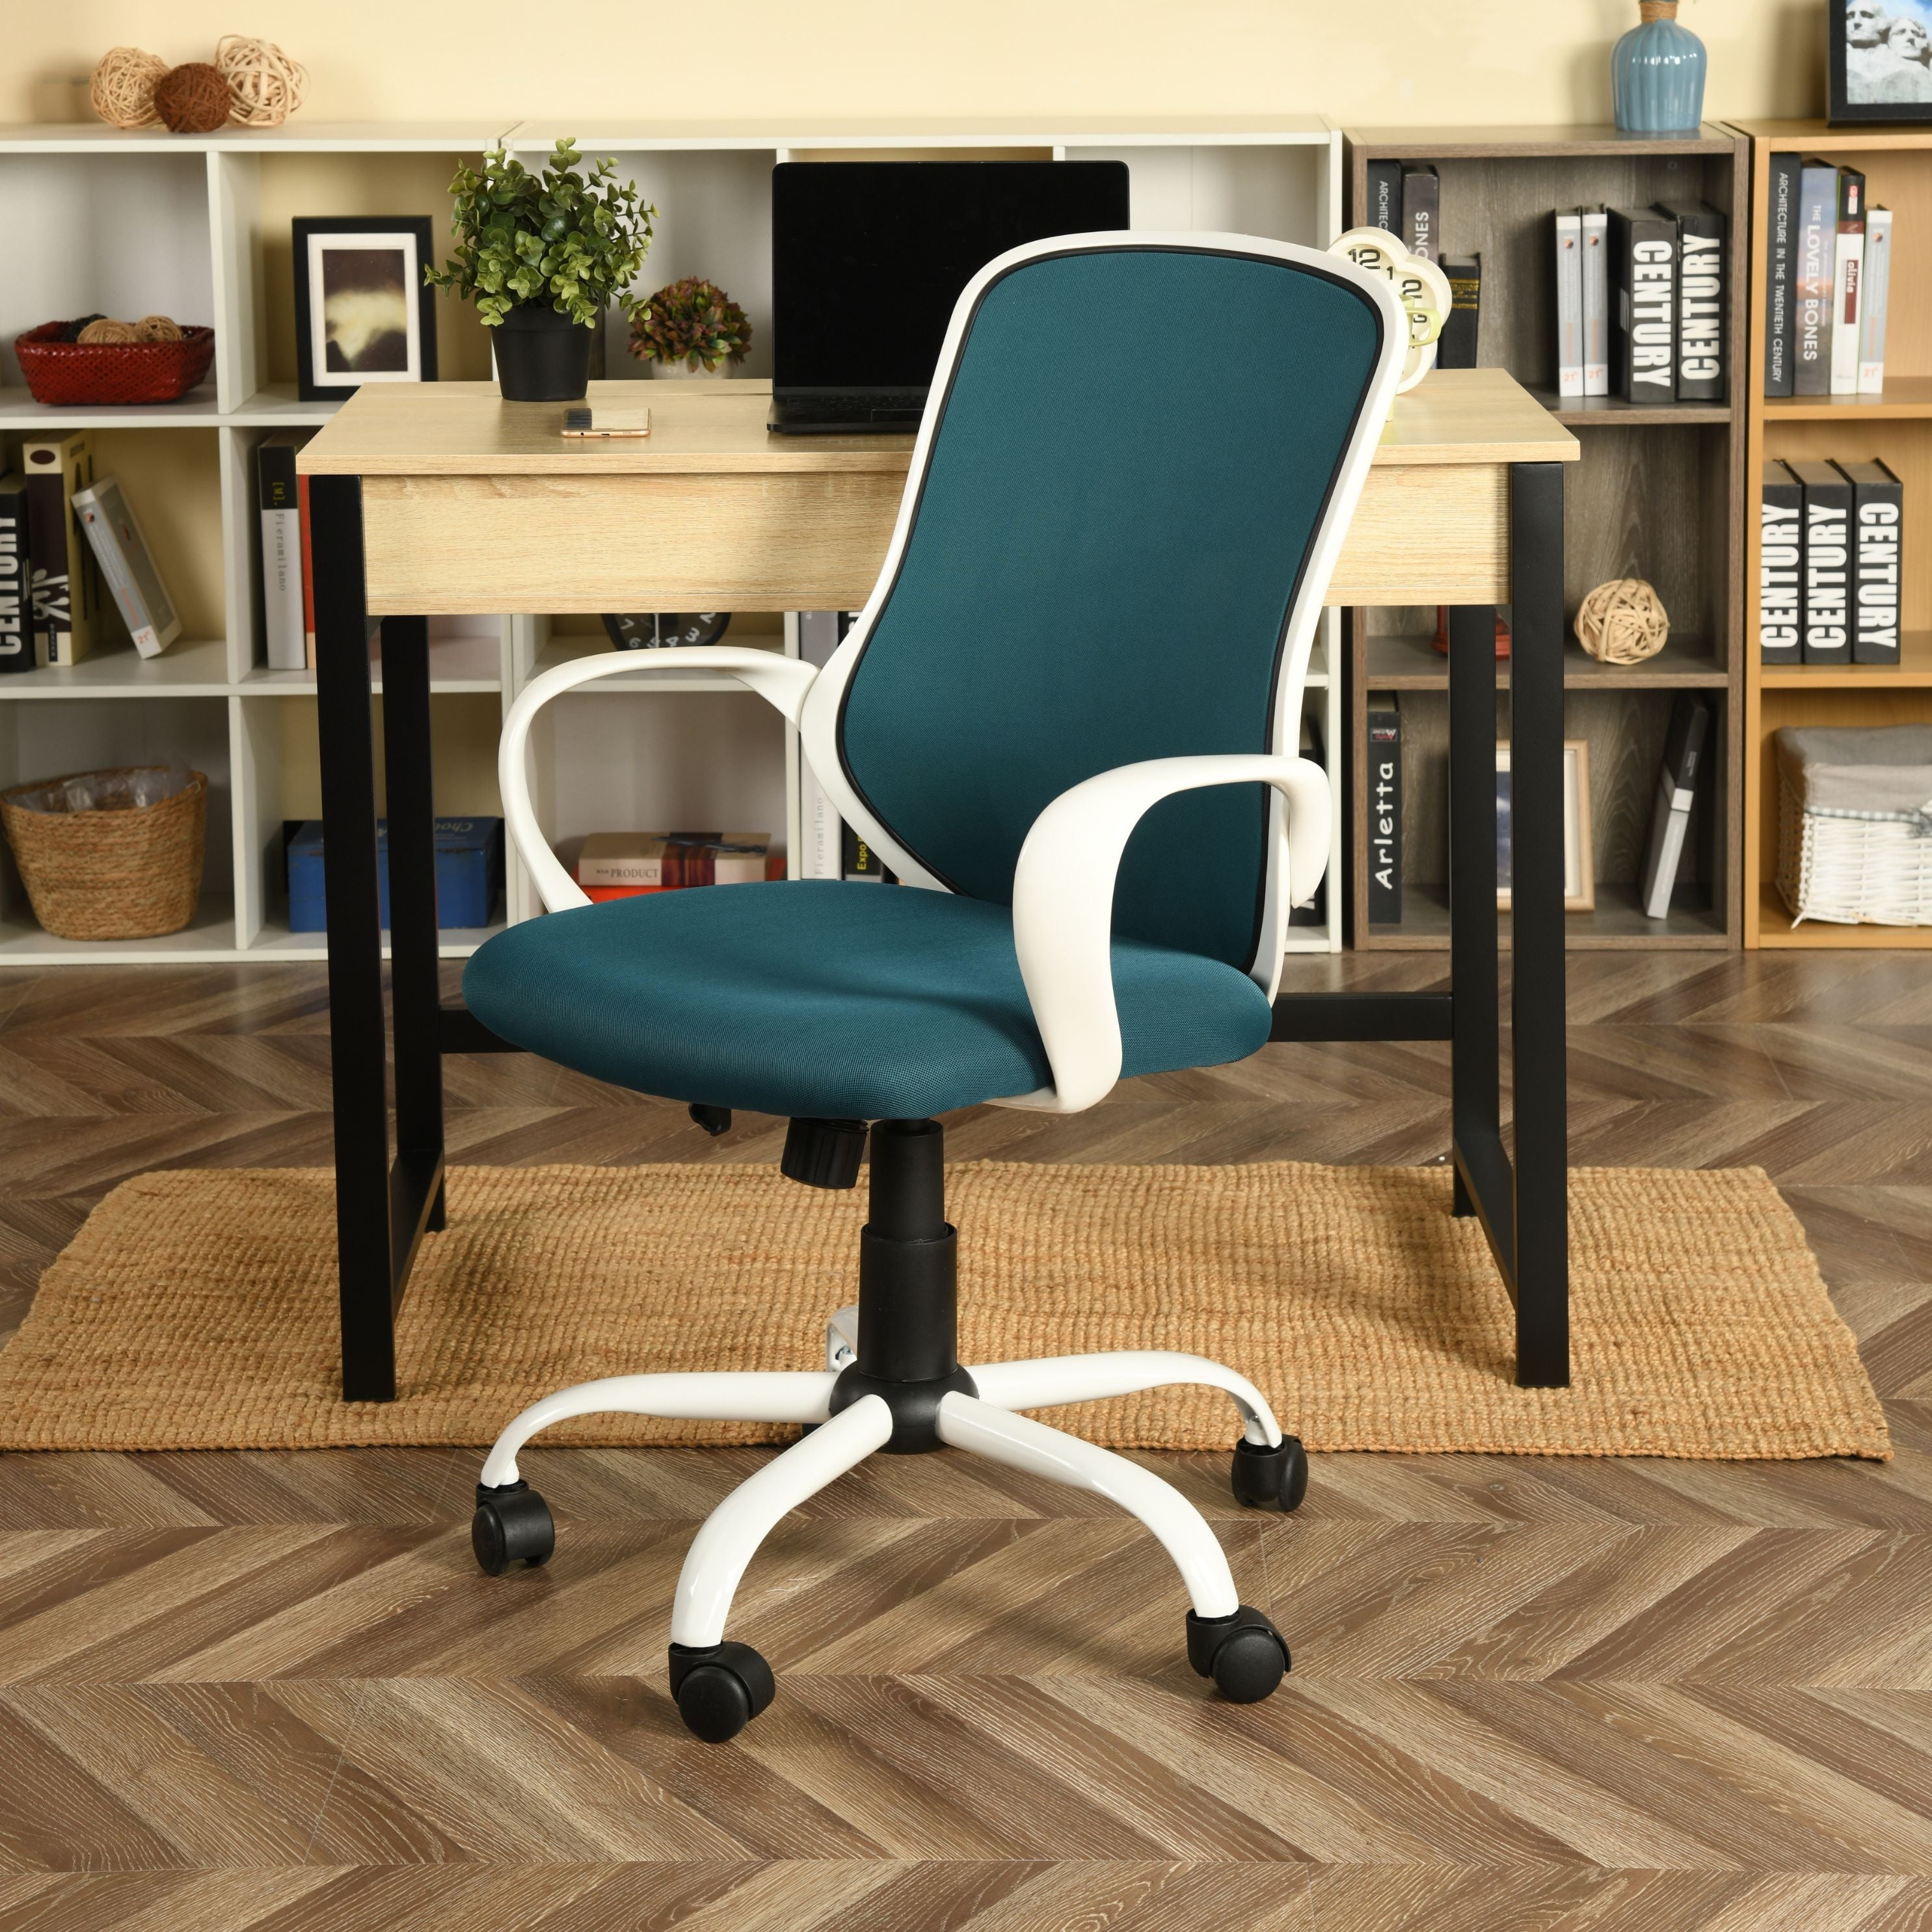 Desert Cabbage Office Chairs